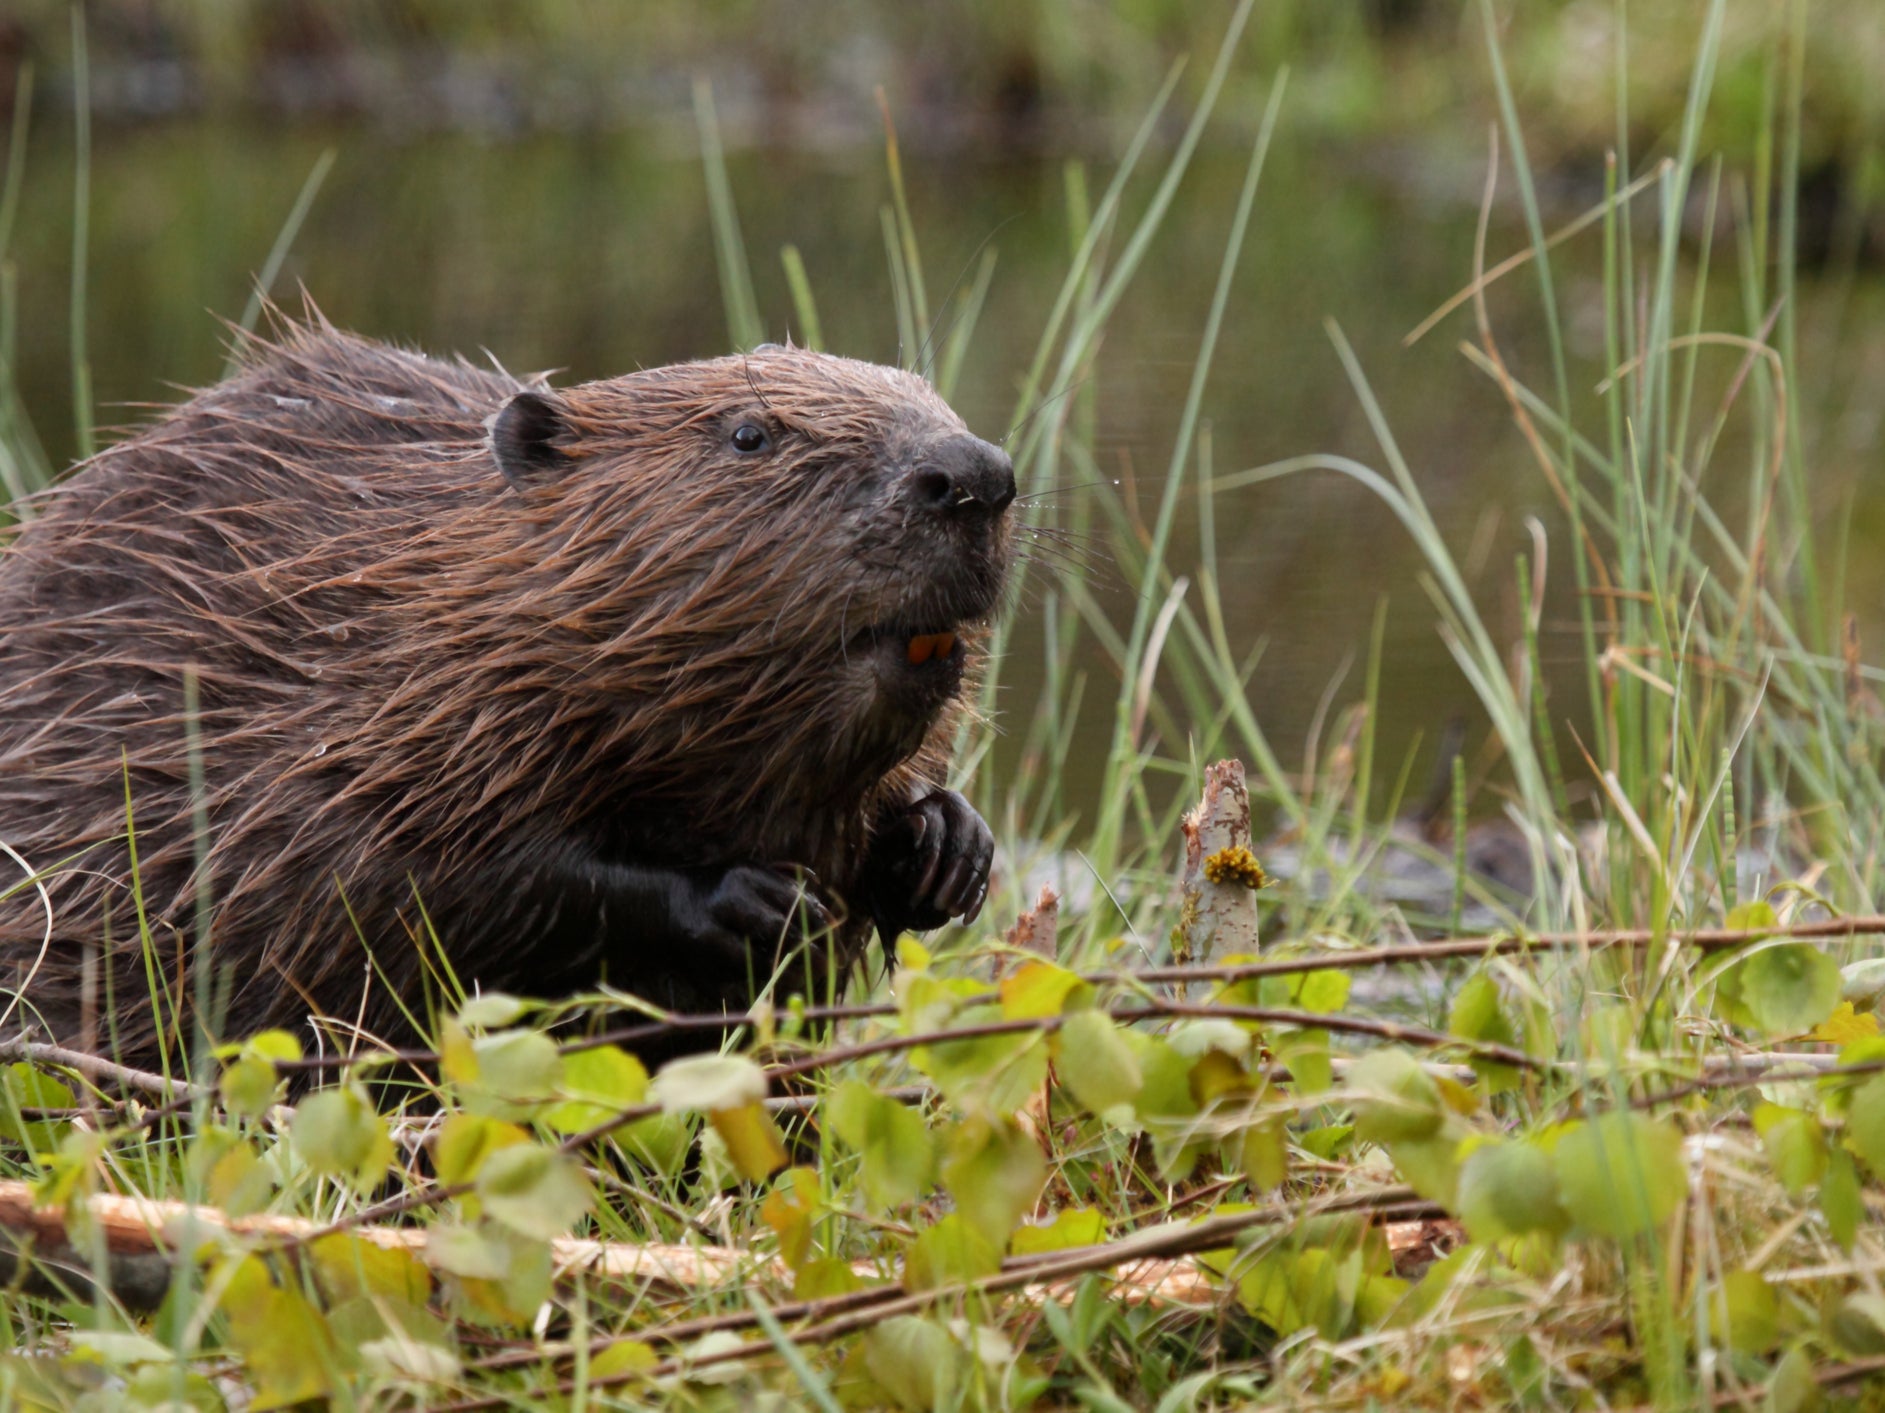 Beavers were reintroduced at the National Trust’s Holnicote Estate in Somerset in 2020. The impact has been dramatic